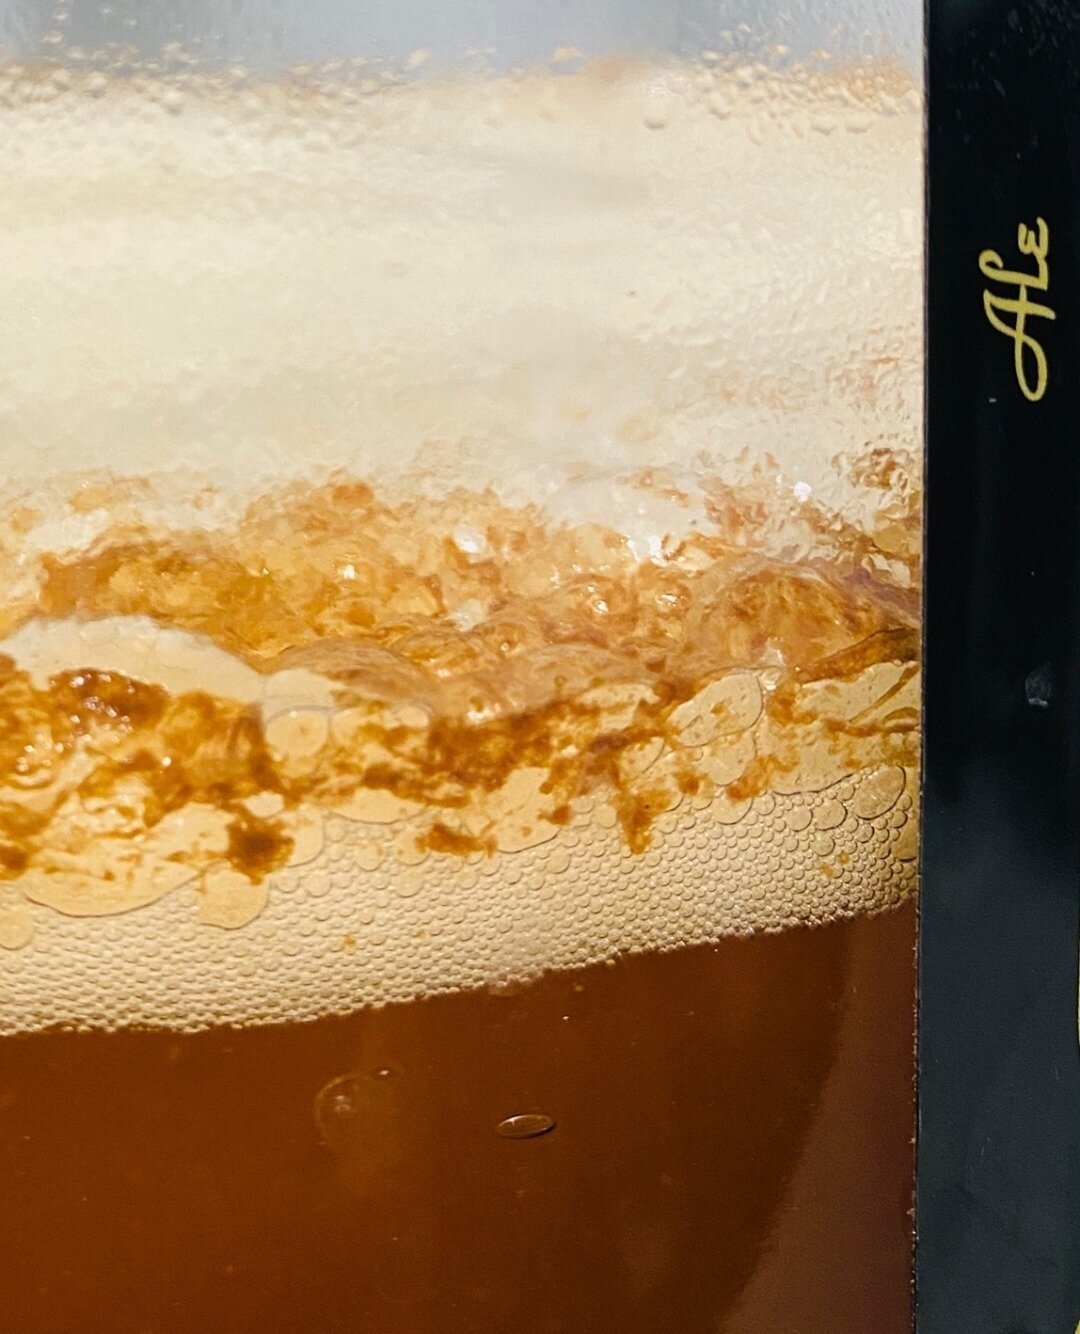 The brewmaster is diving into a new batch of liquid gold. &quot;Escape the Fray&quot; is our Copper Ale made with Norwegian farmhouse yeast or kveik. (think kuh-vike)⁠
A hardy yeast from Norway passed down through the generations provides a special i